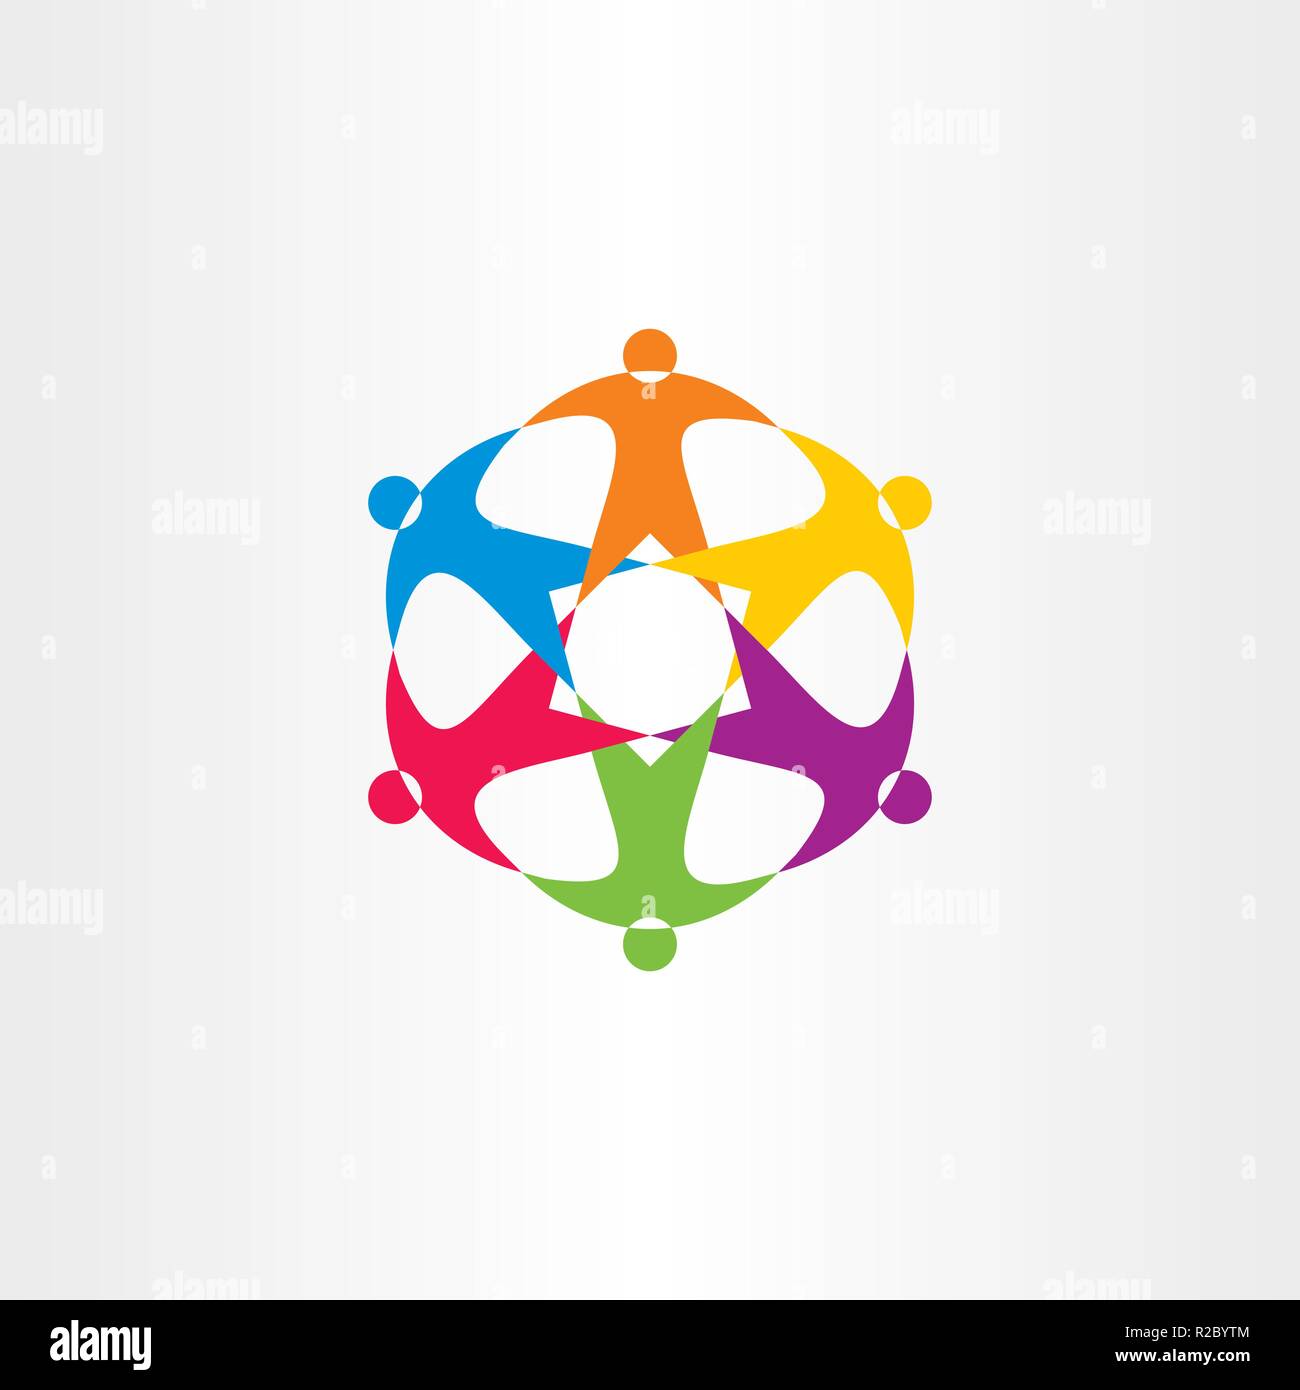 team people circle colorful logo connection icon Stock Vector